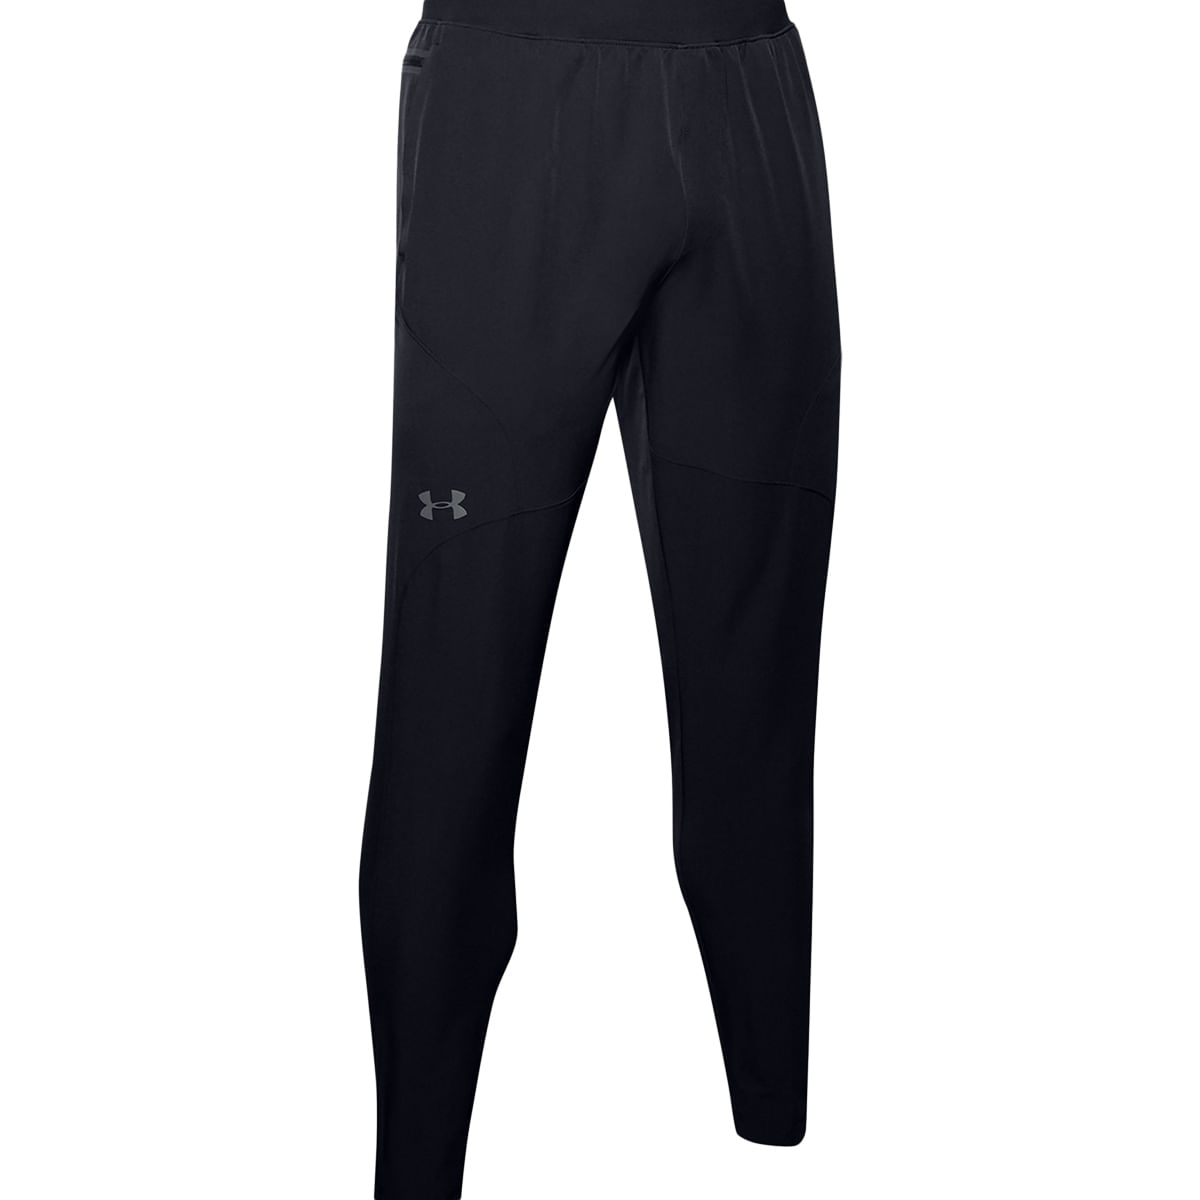 Under Armour Mens UNSTOPPABLE TAPERED PANT BLACK - Paragon Sports